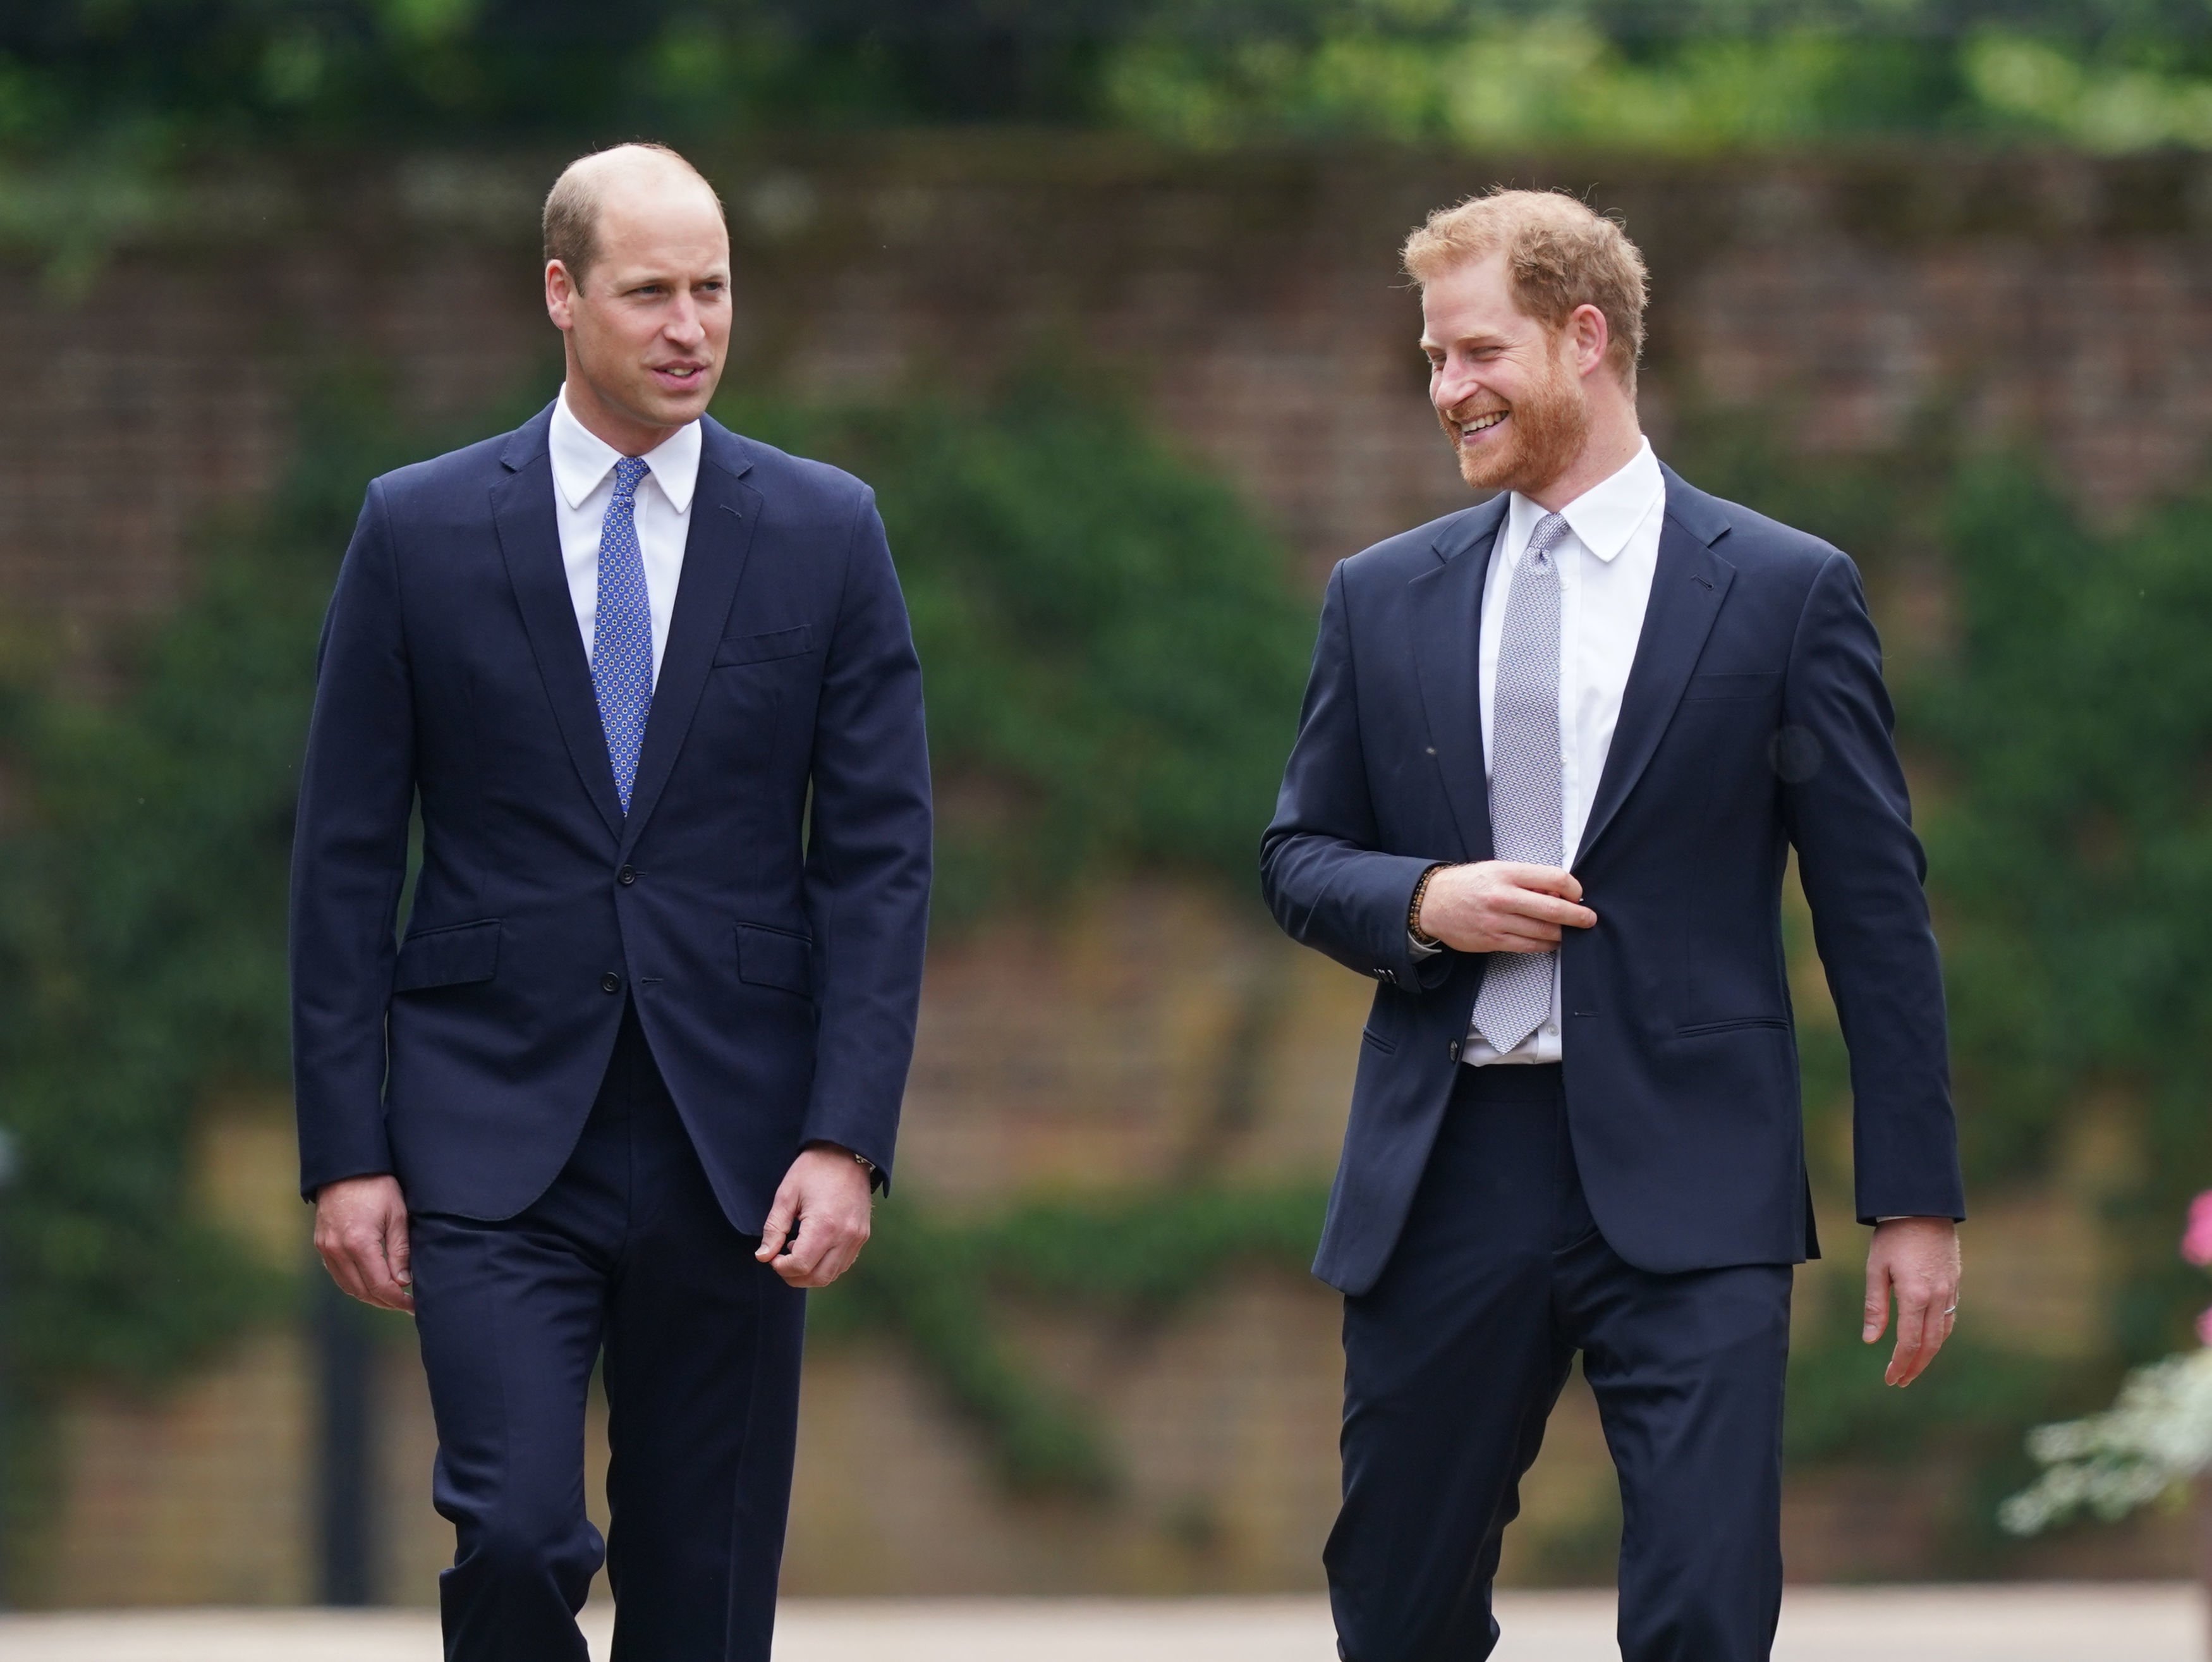 Prince William and Prince Harry arrive for the unveiling of a statue they commissioned of their mother, Diana, Princess of Wales, in the Sunken Garden at Kensington Palace, on what would have been her 60th birthday on July 1, 2021, in London, England. | Source: Getty Images